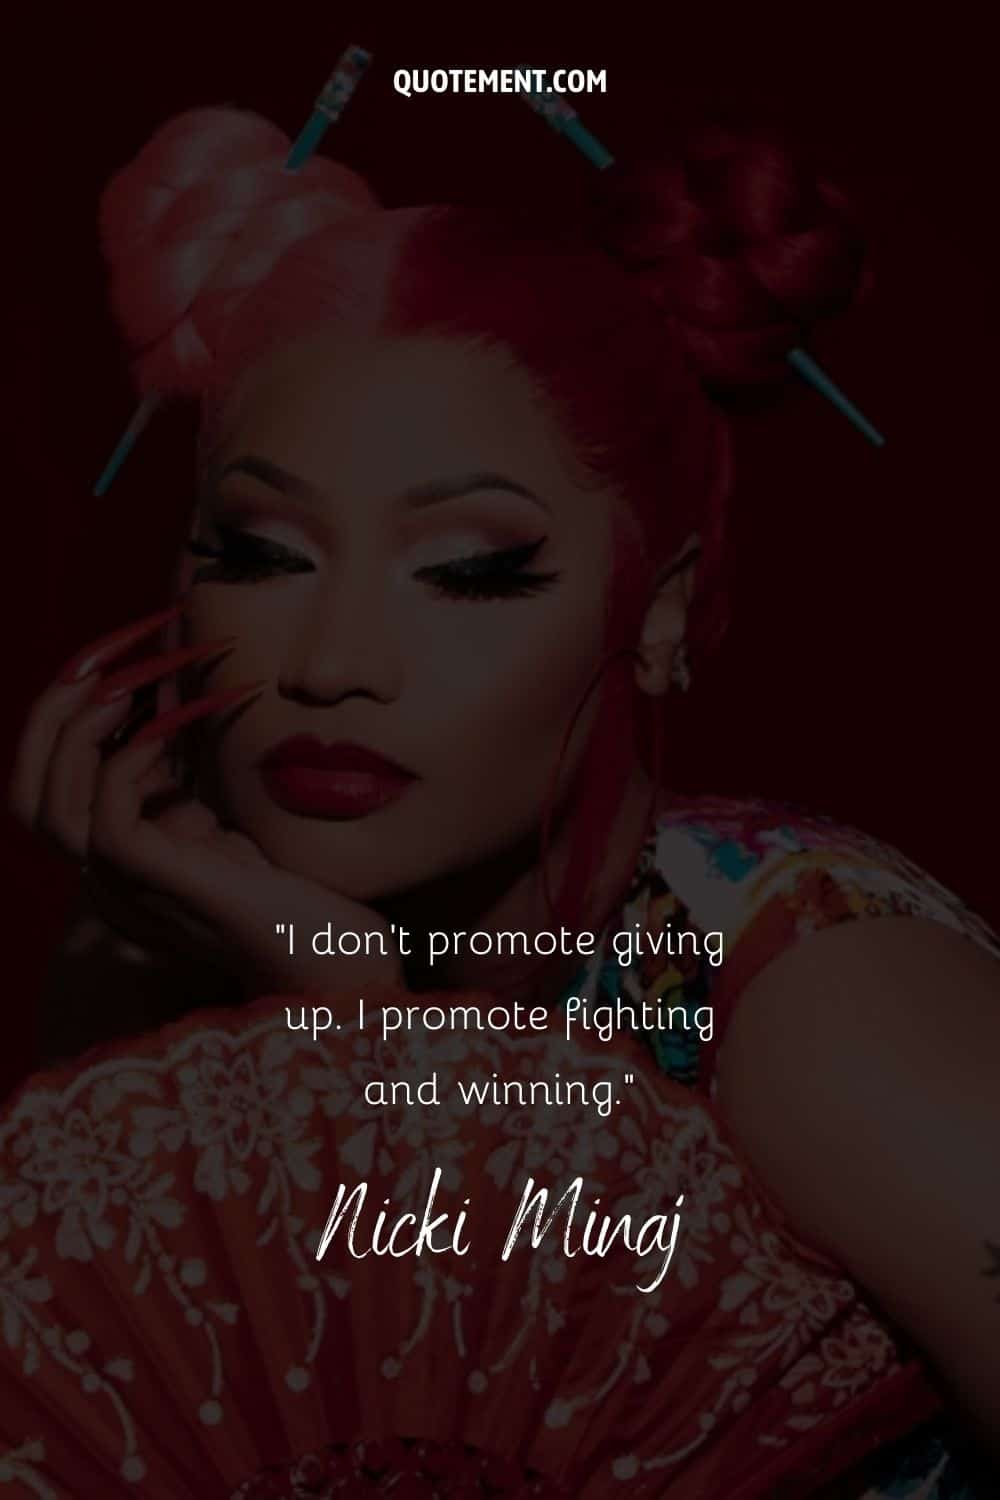 Motivational quote on fighting by Nicki Minaj, and her photo in the background